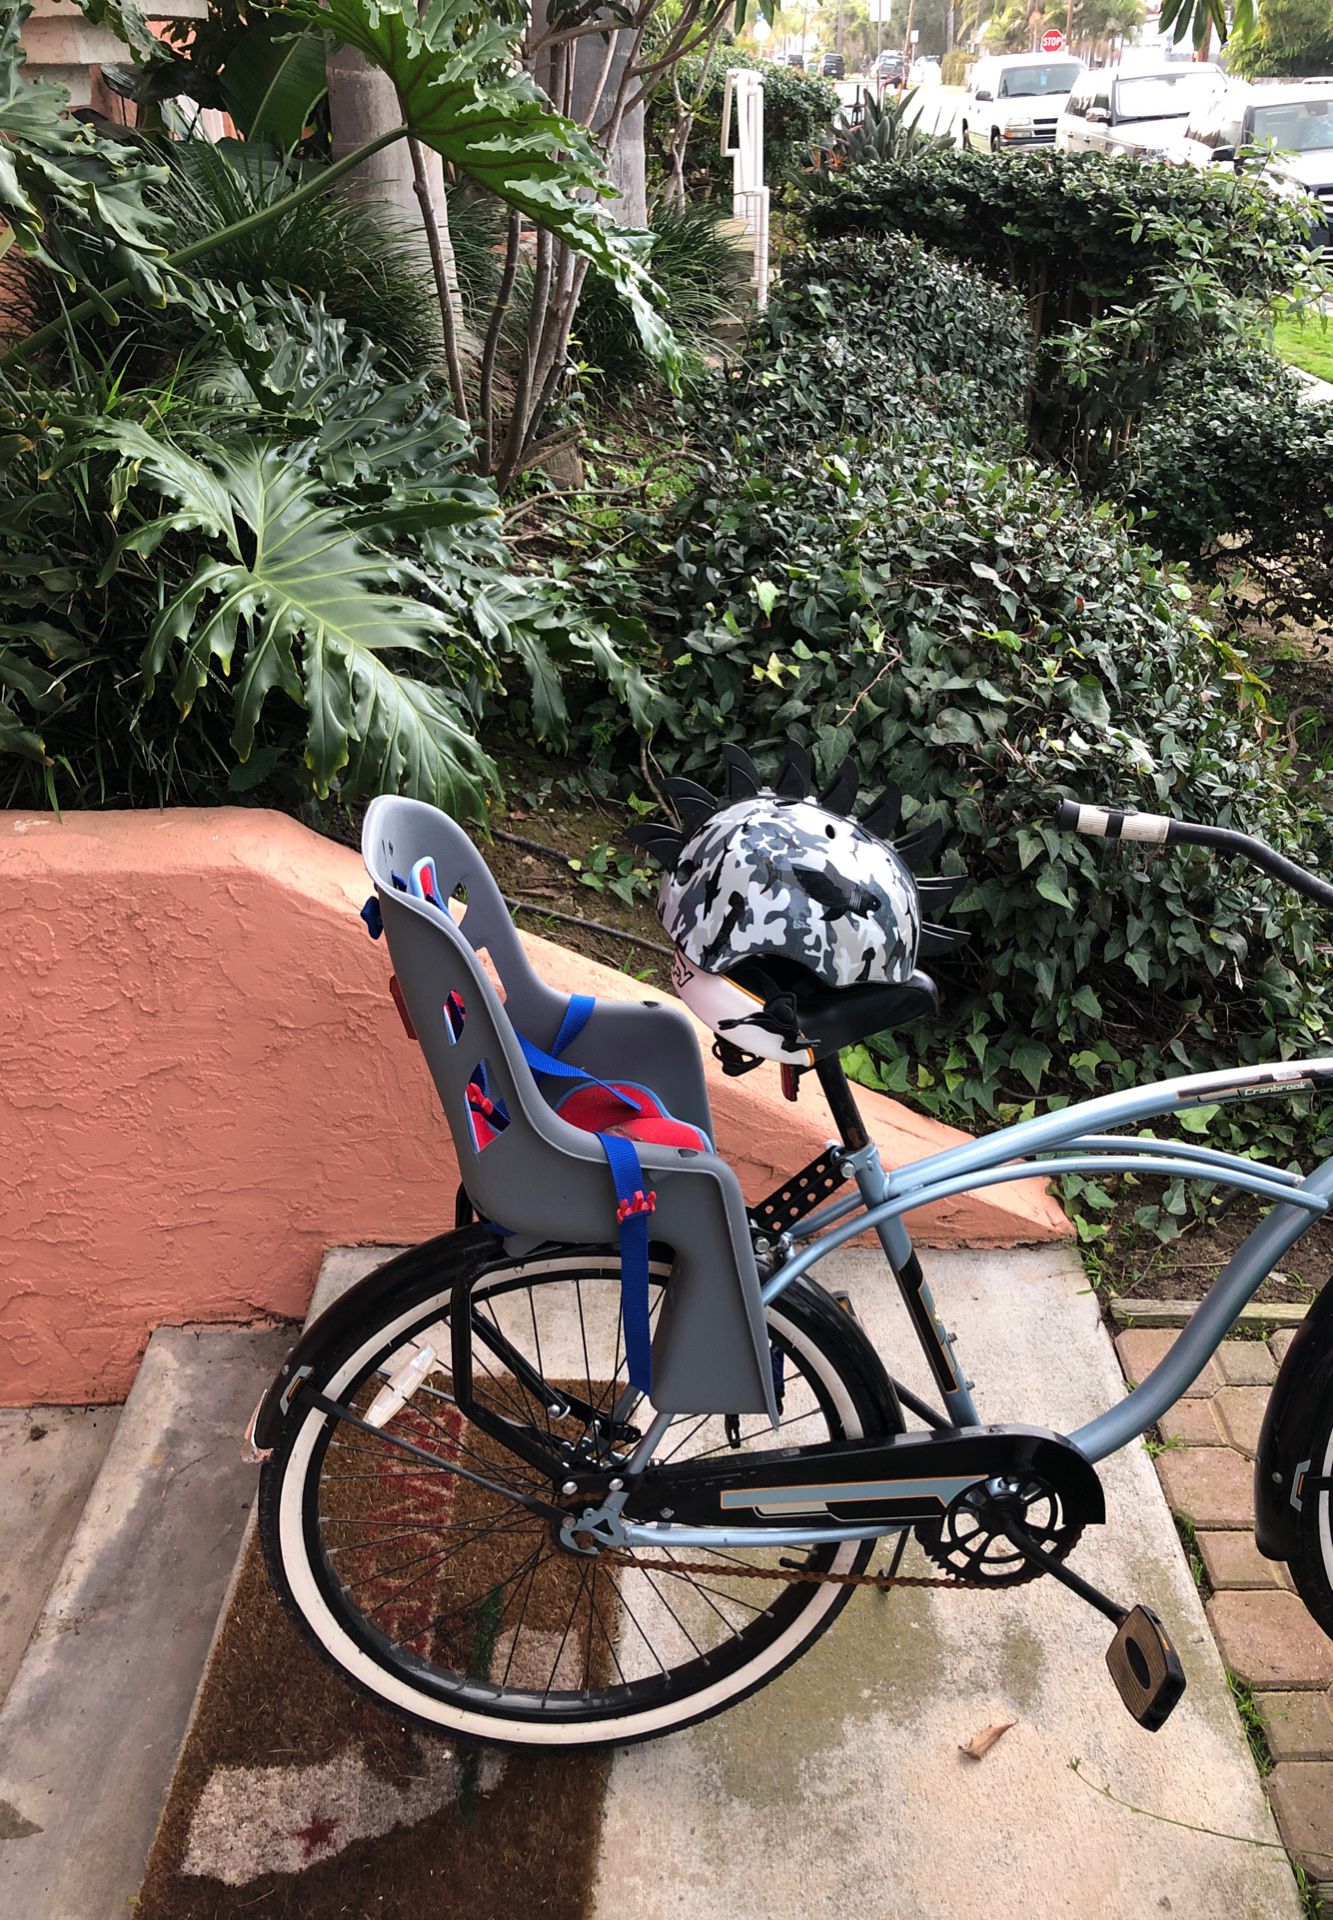 Bell Bike seat for kids, includes a small child’s helmet